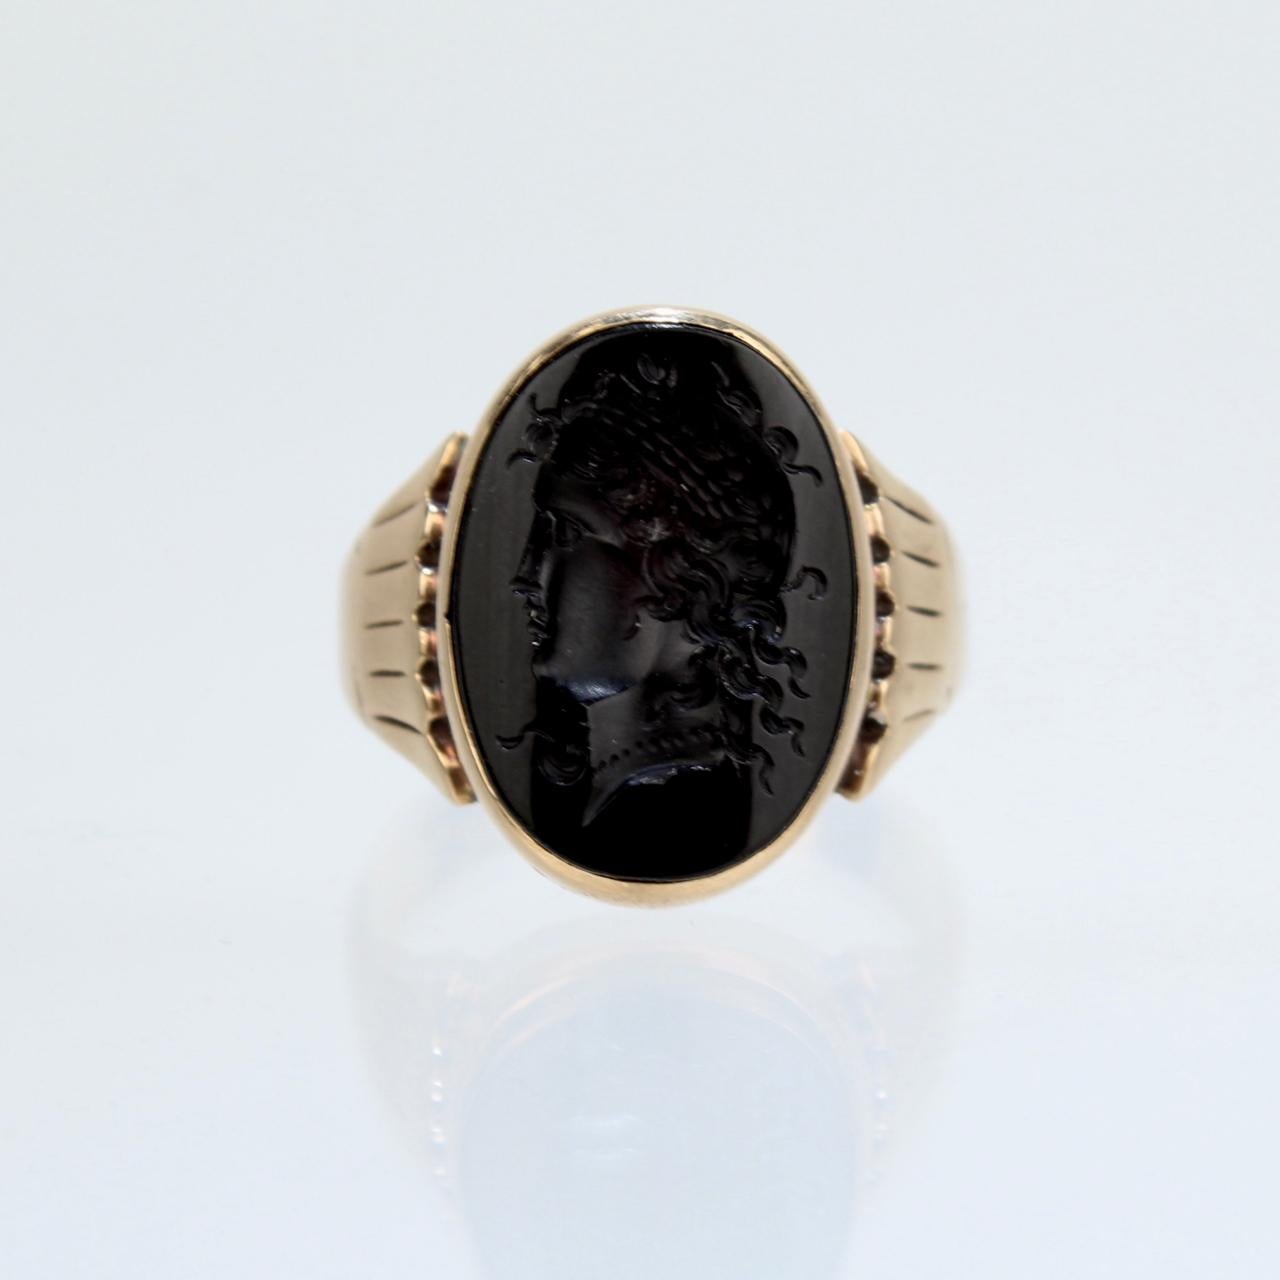 Antique Victorian Cameo 14 Karat Gold & Onyx Signet Ring with Dedication 5